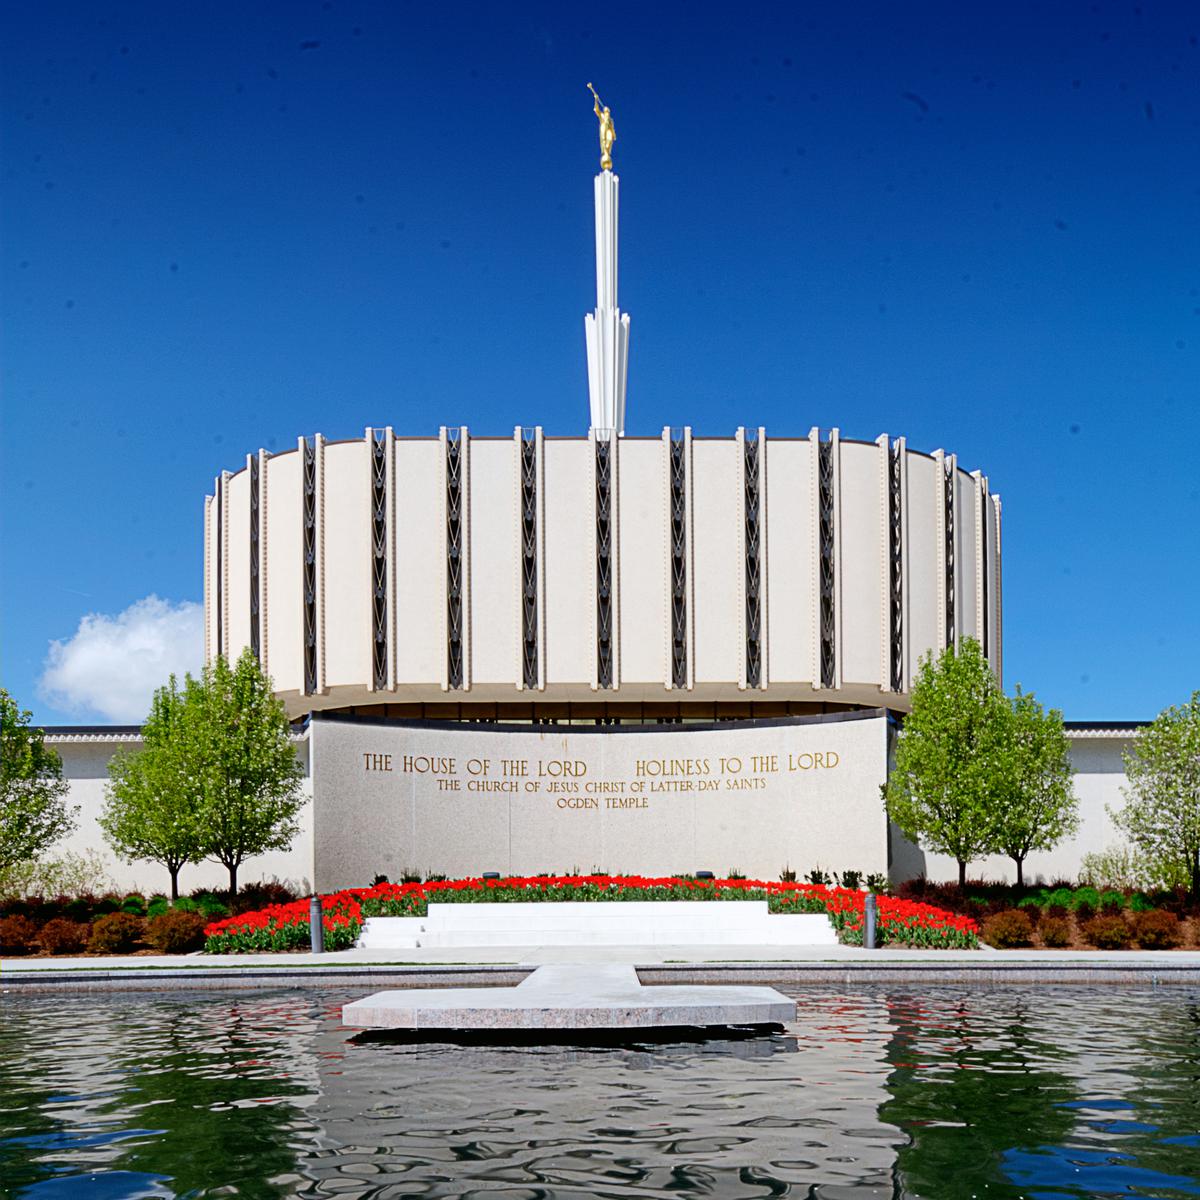 The exterior of the original Ogden Utah Temple, dedicated in 1972, that had a flat, round base with a spire in the center, with a reflecting pool in front of the building.